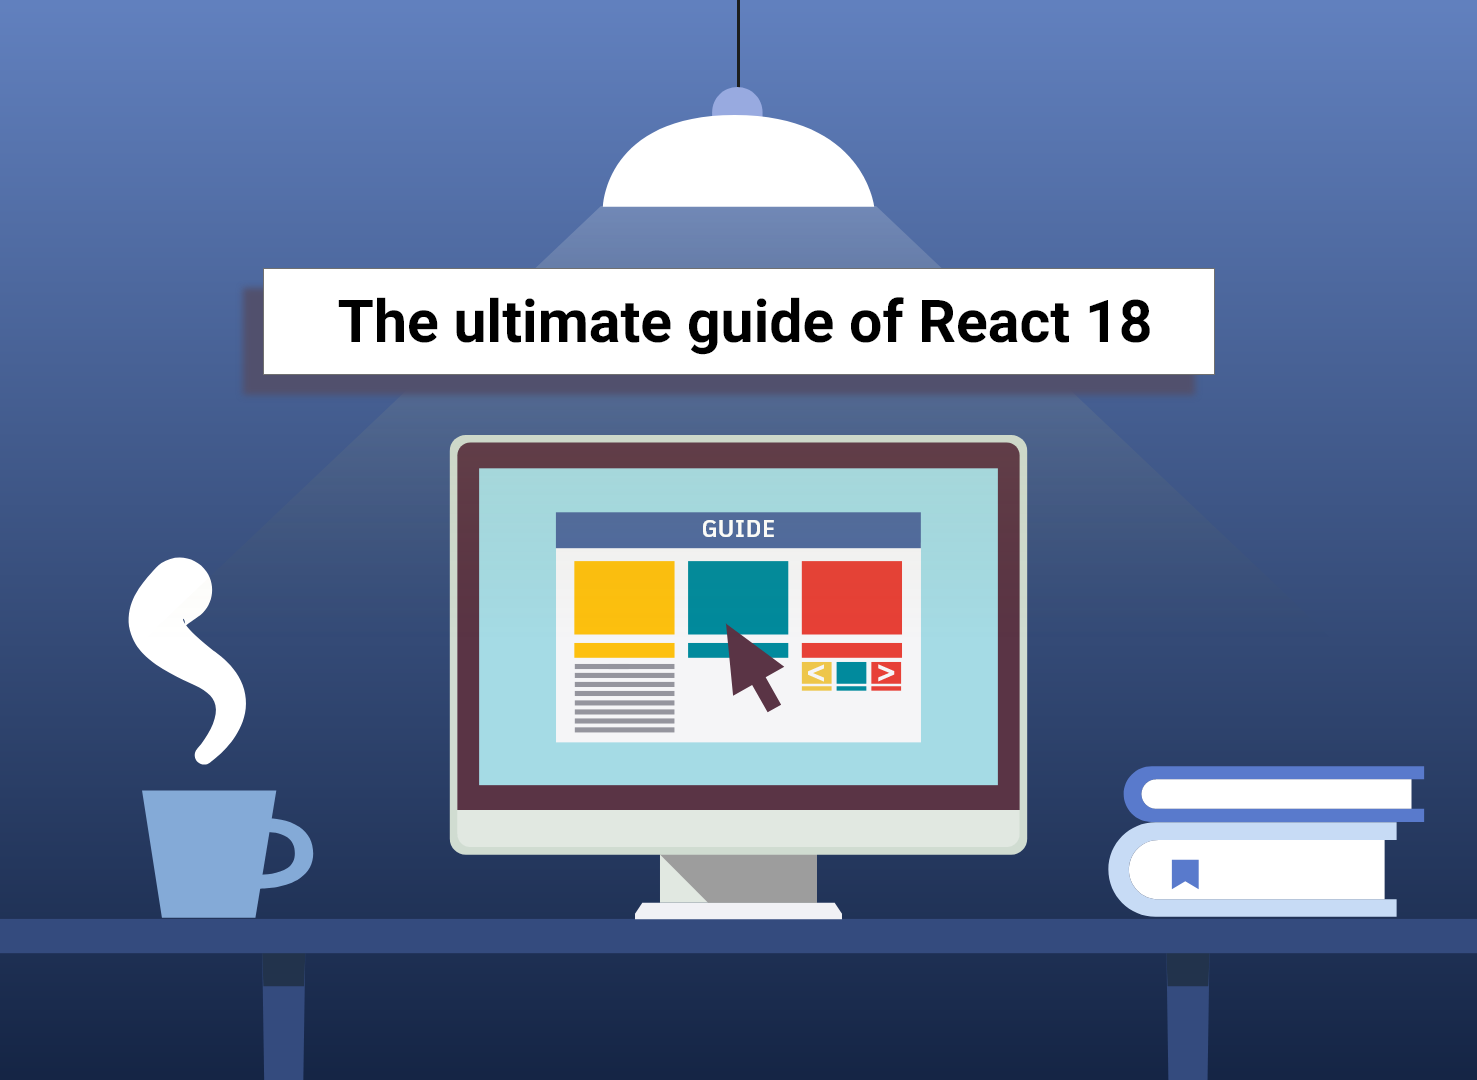 The Ultimate Guide of React 18 